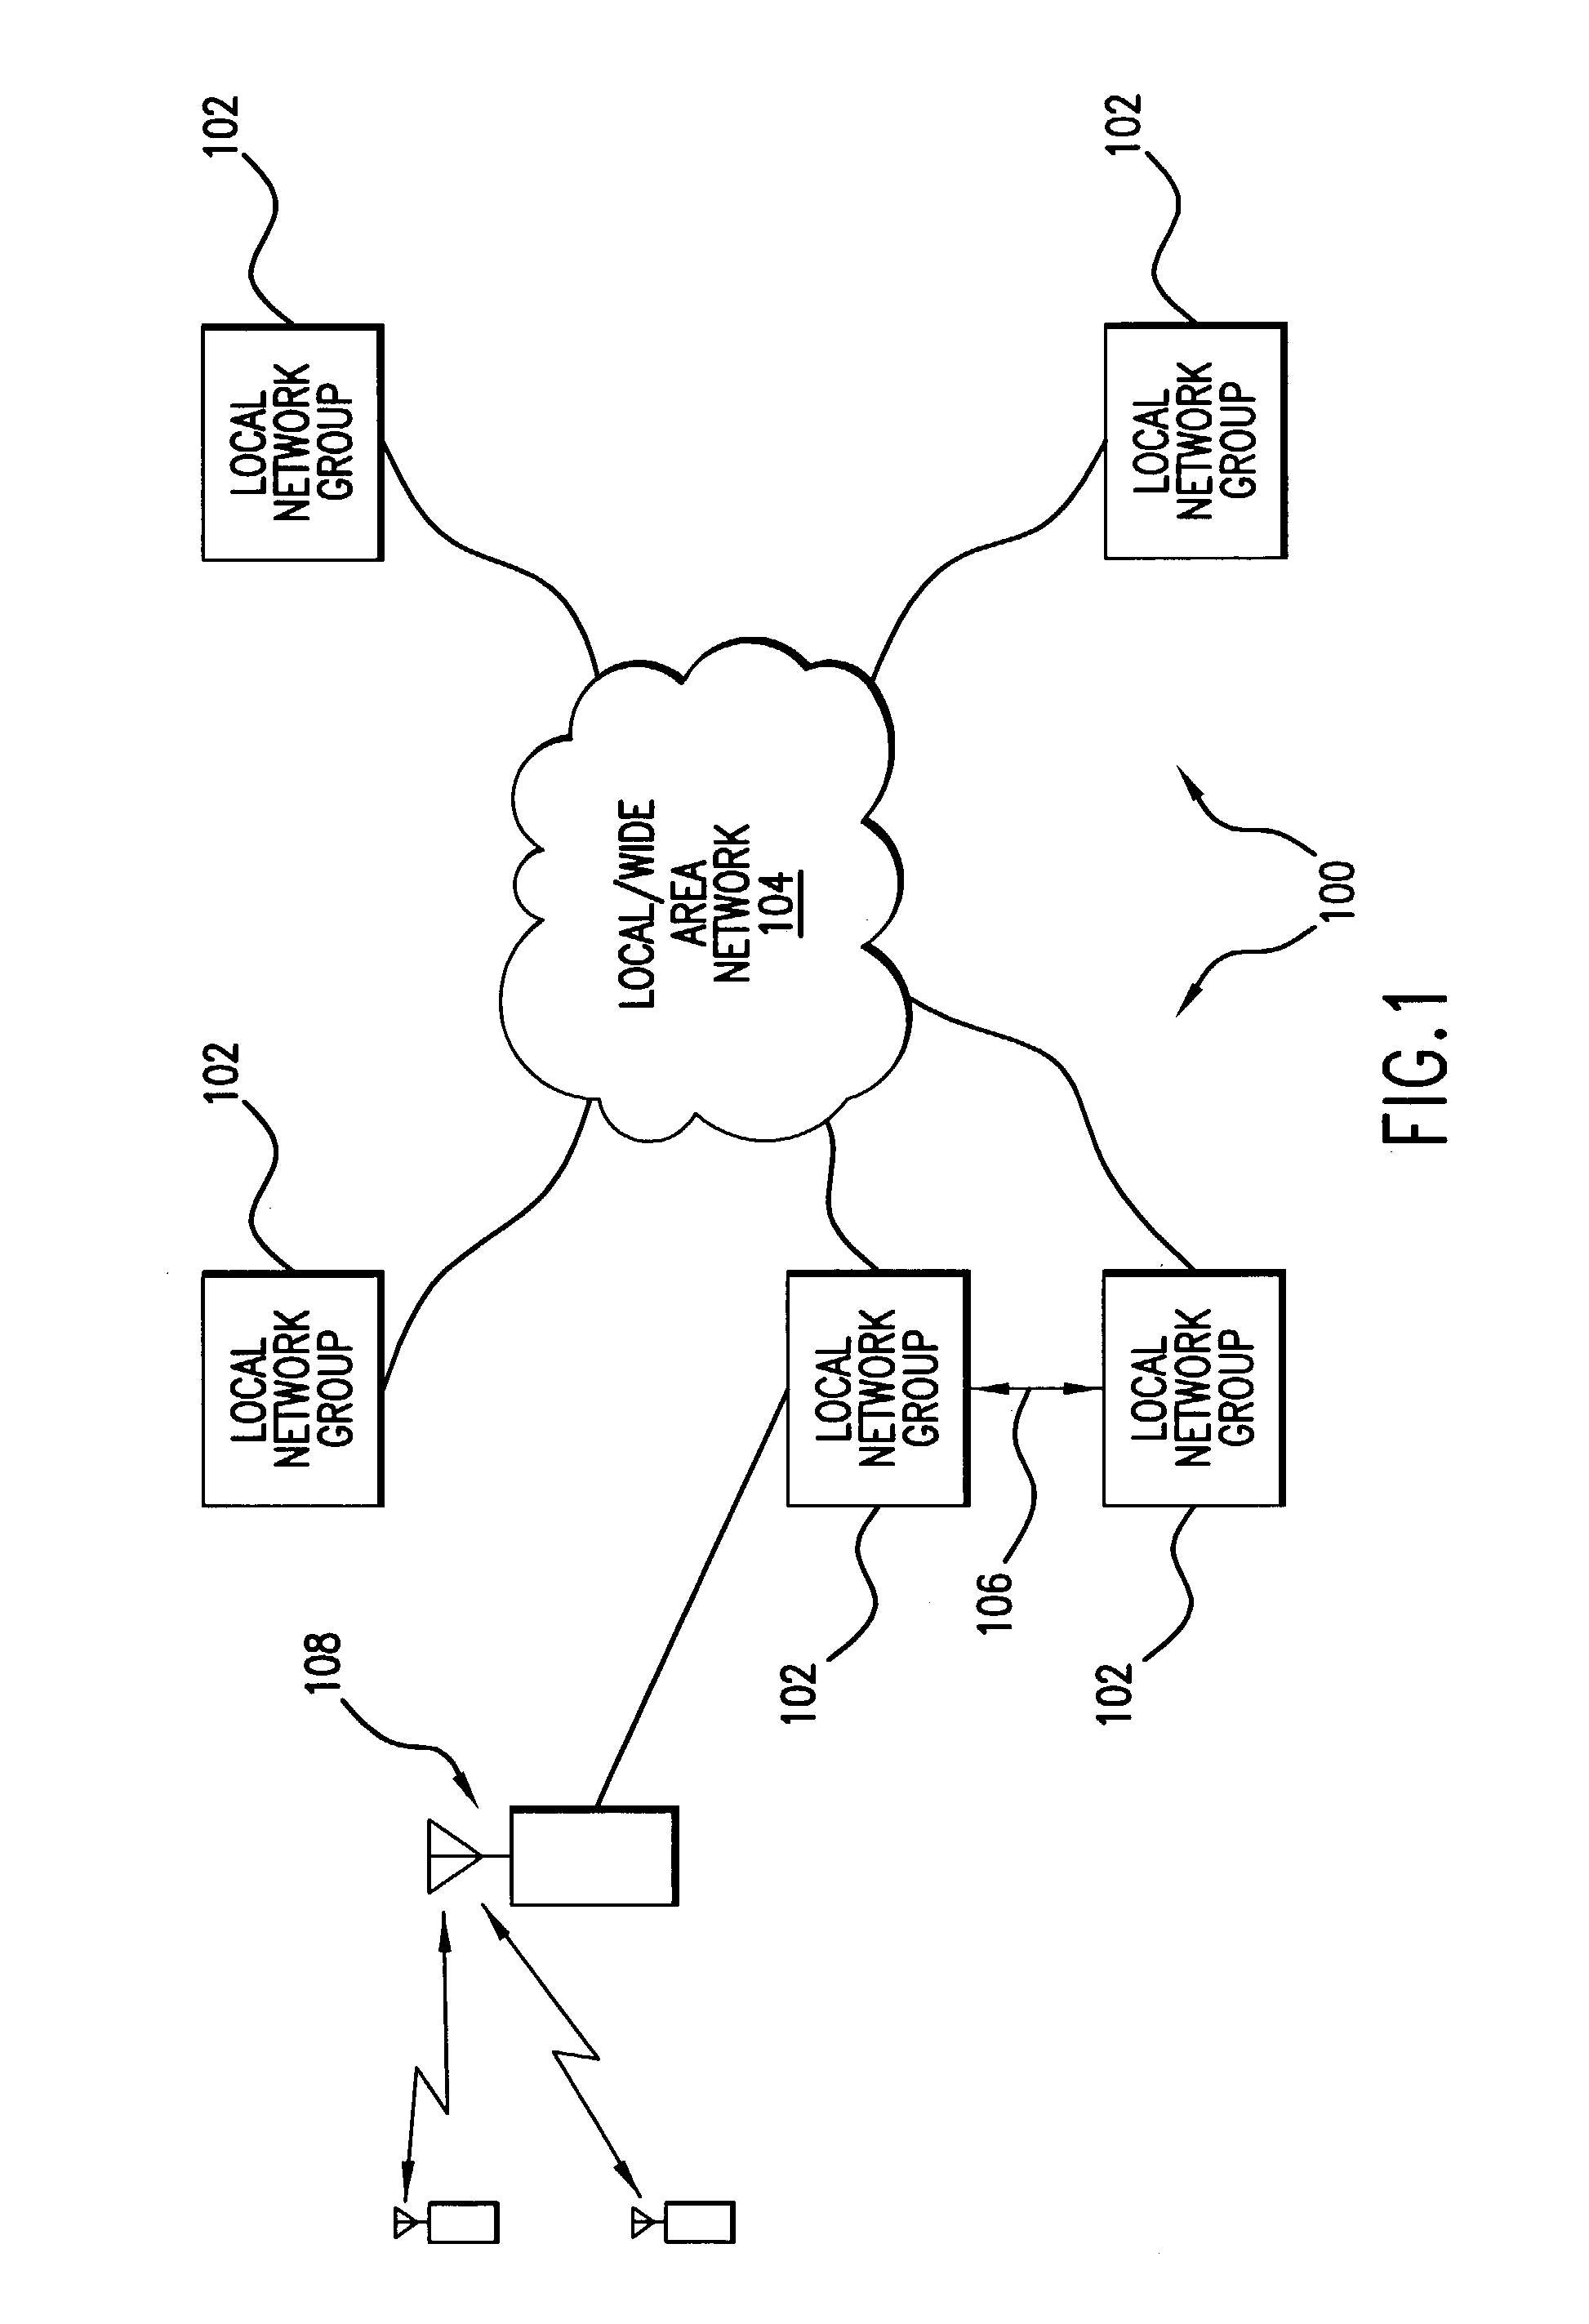 Method and apparatus for high availability distributed processing across independent networked computer fault groups